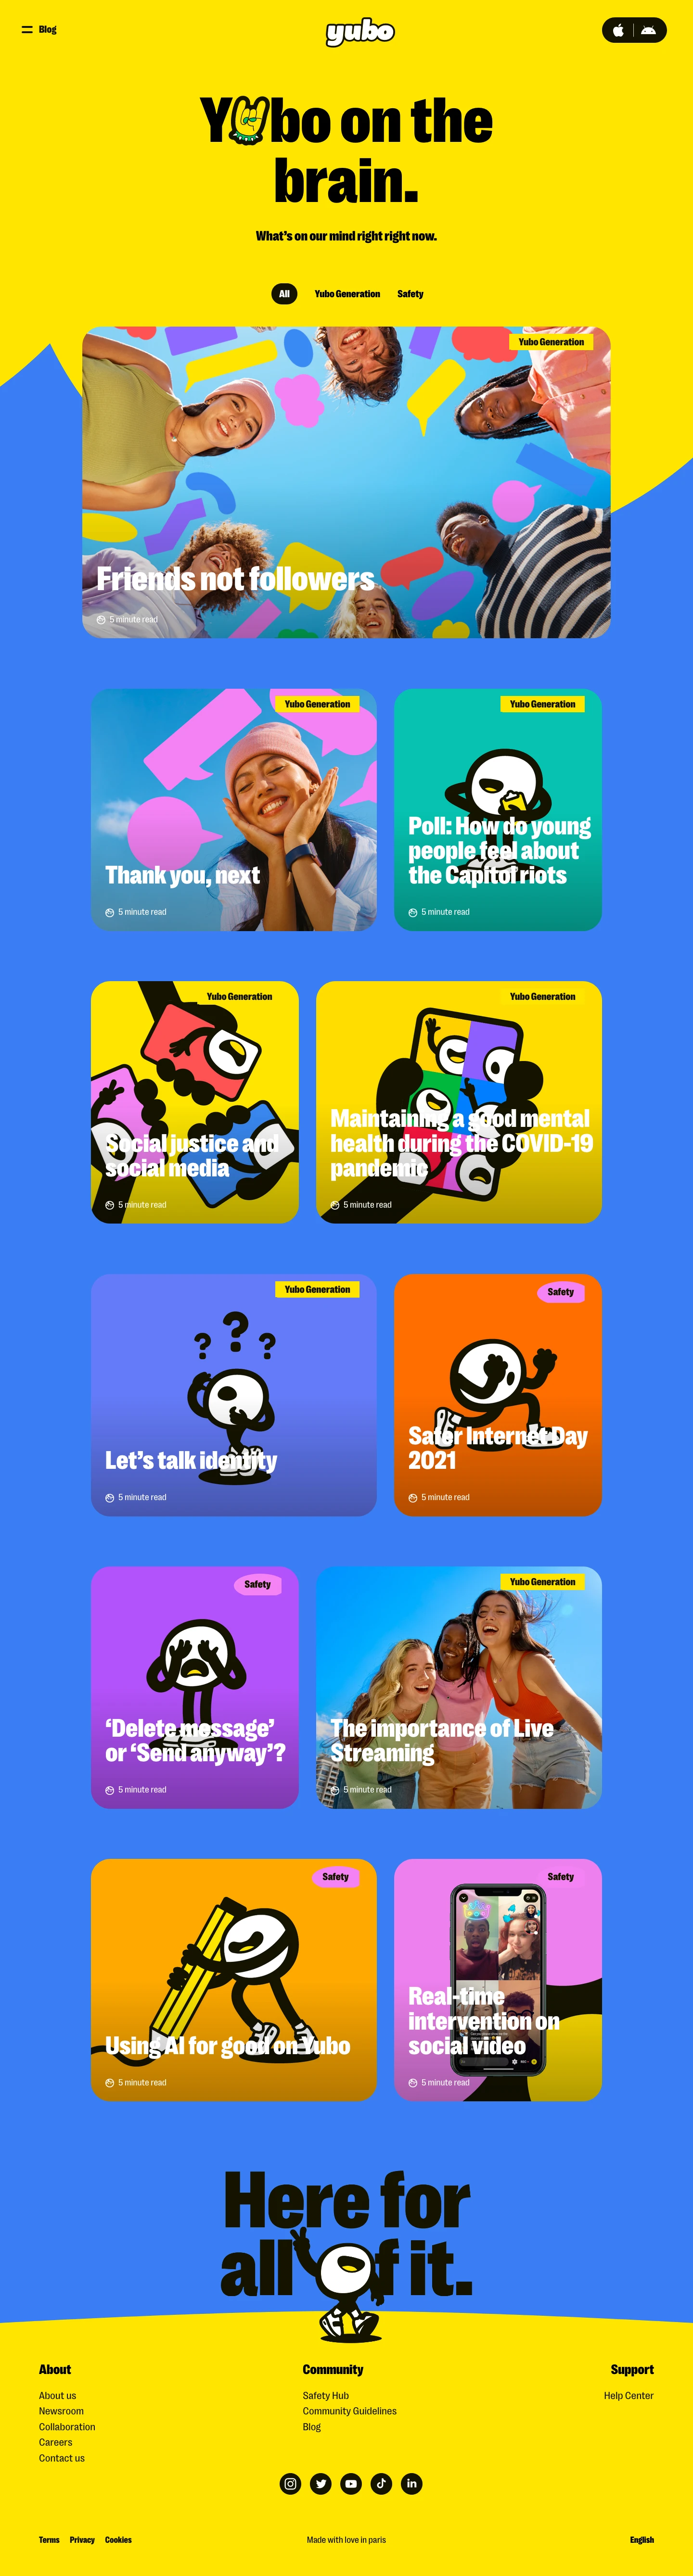 Yubo Landing Page Example: Yubo is your social video live-streaming app. Join the fun, chat, play games, and live stream. There’s always a place for you here. Ready to Yubo?